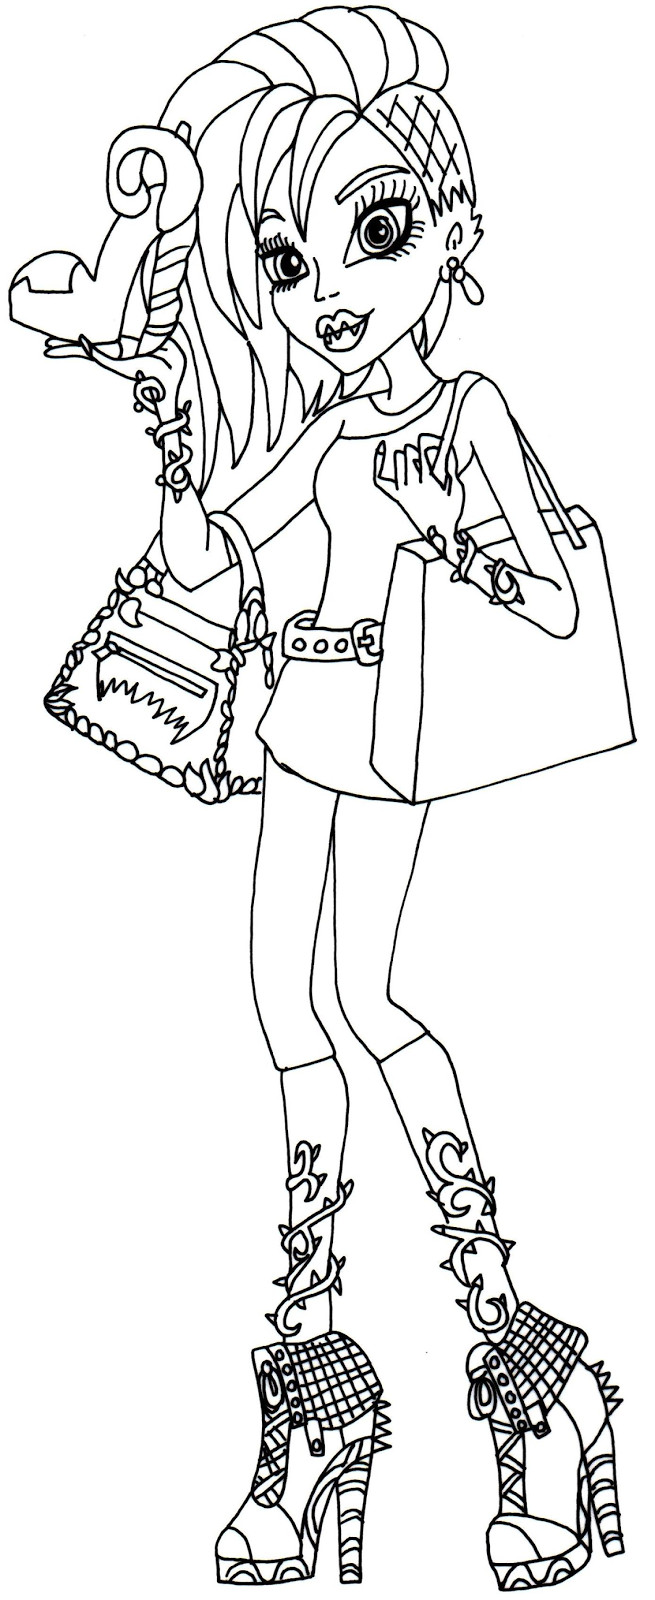 Free Printable Monster High Coloring Pages
 Free Printable Monster High Coloring Pages Venus